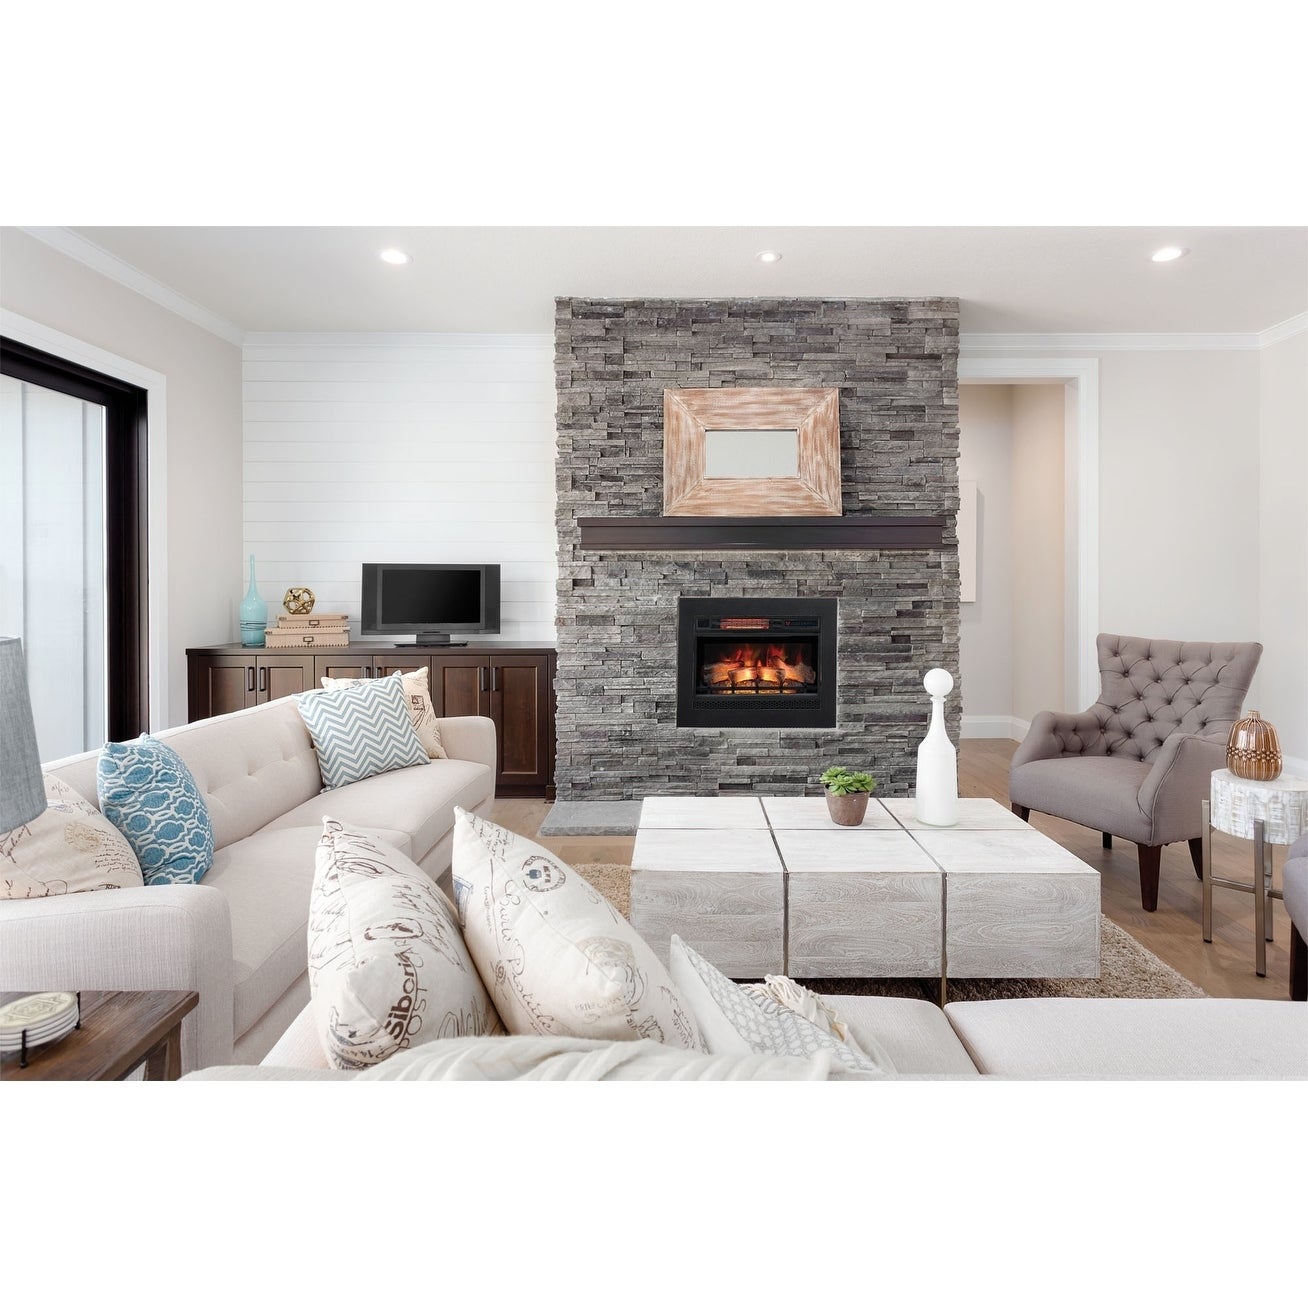 Huge Fireplace New Classicflame 26" 3d Infrared Quartz Electric Fireplace Insert